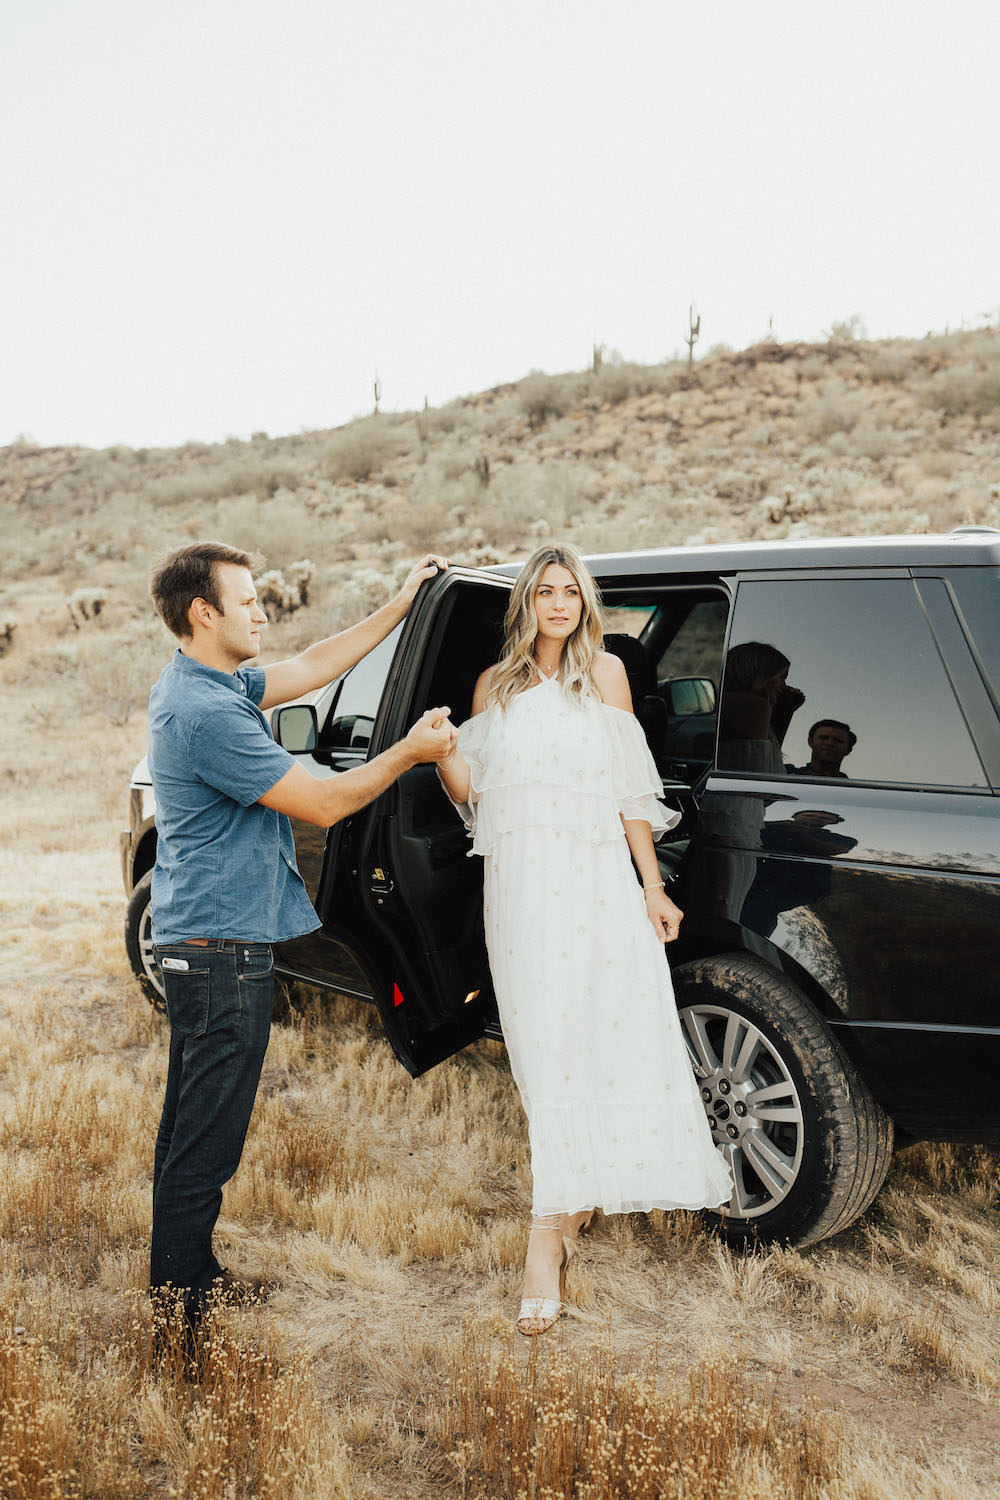 Blogger Dash of Darling shares how she uses Uber for special occasions with a birthday celebration desert dinner.